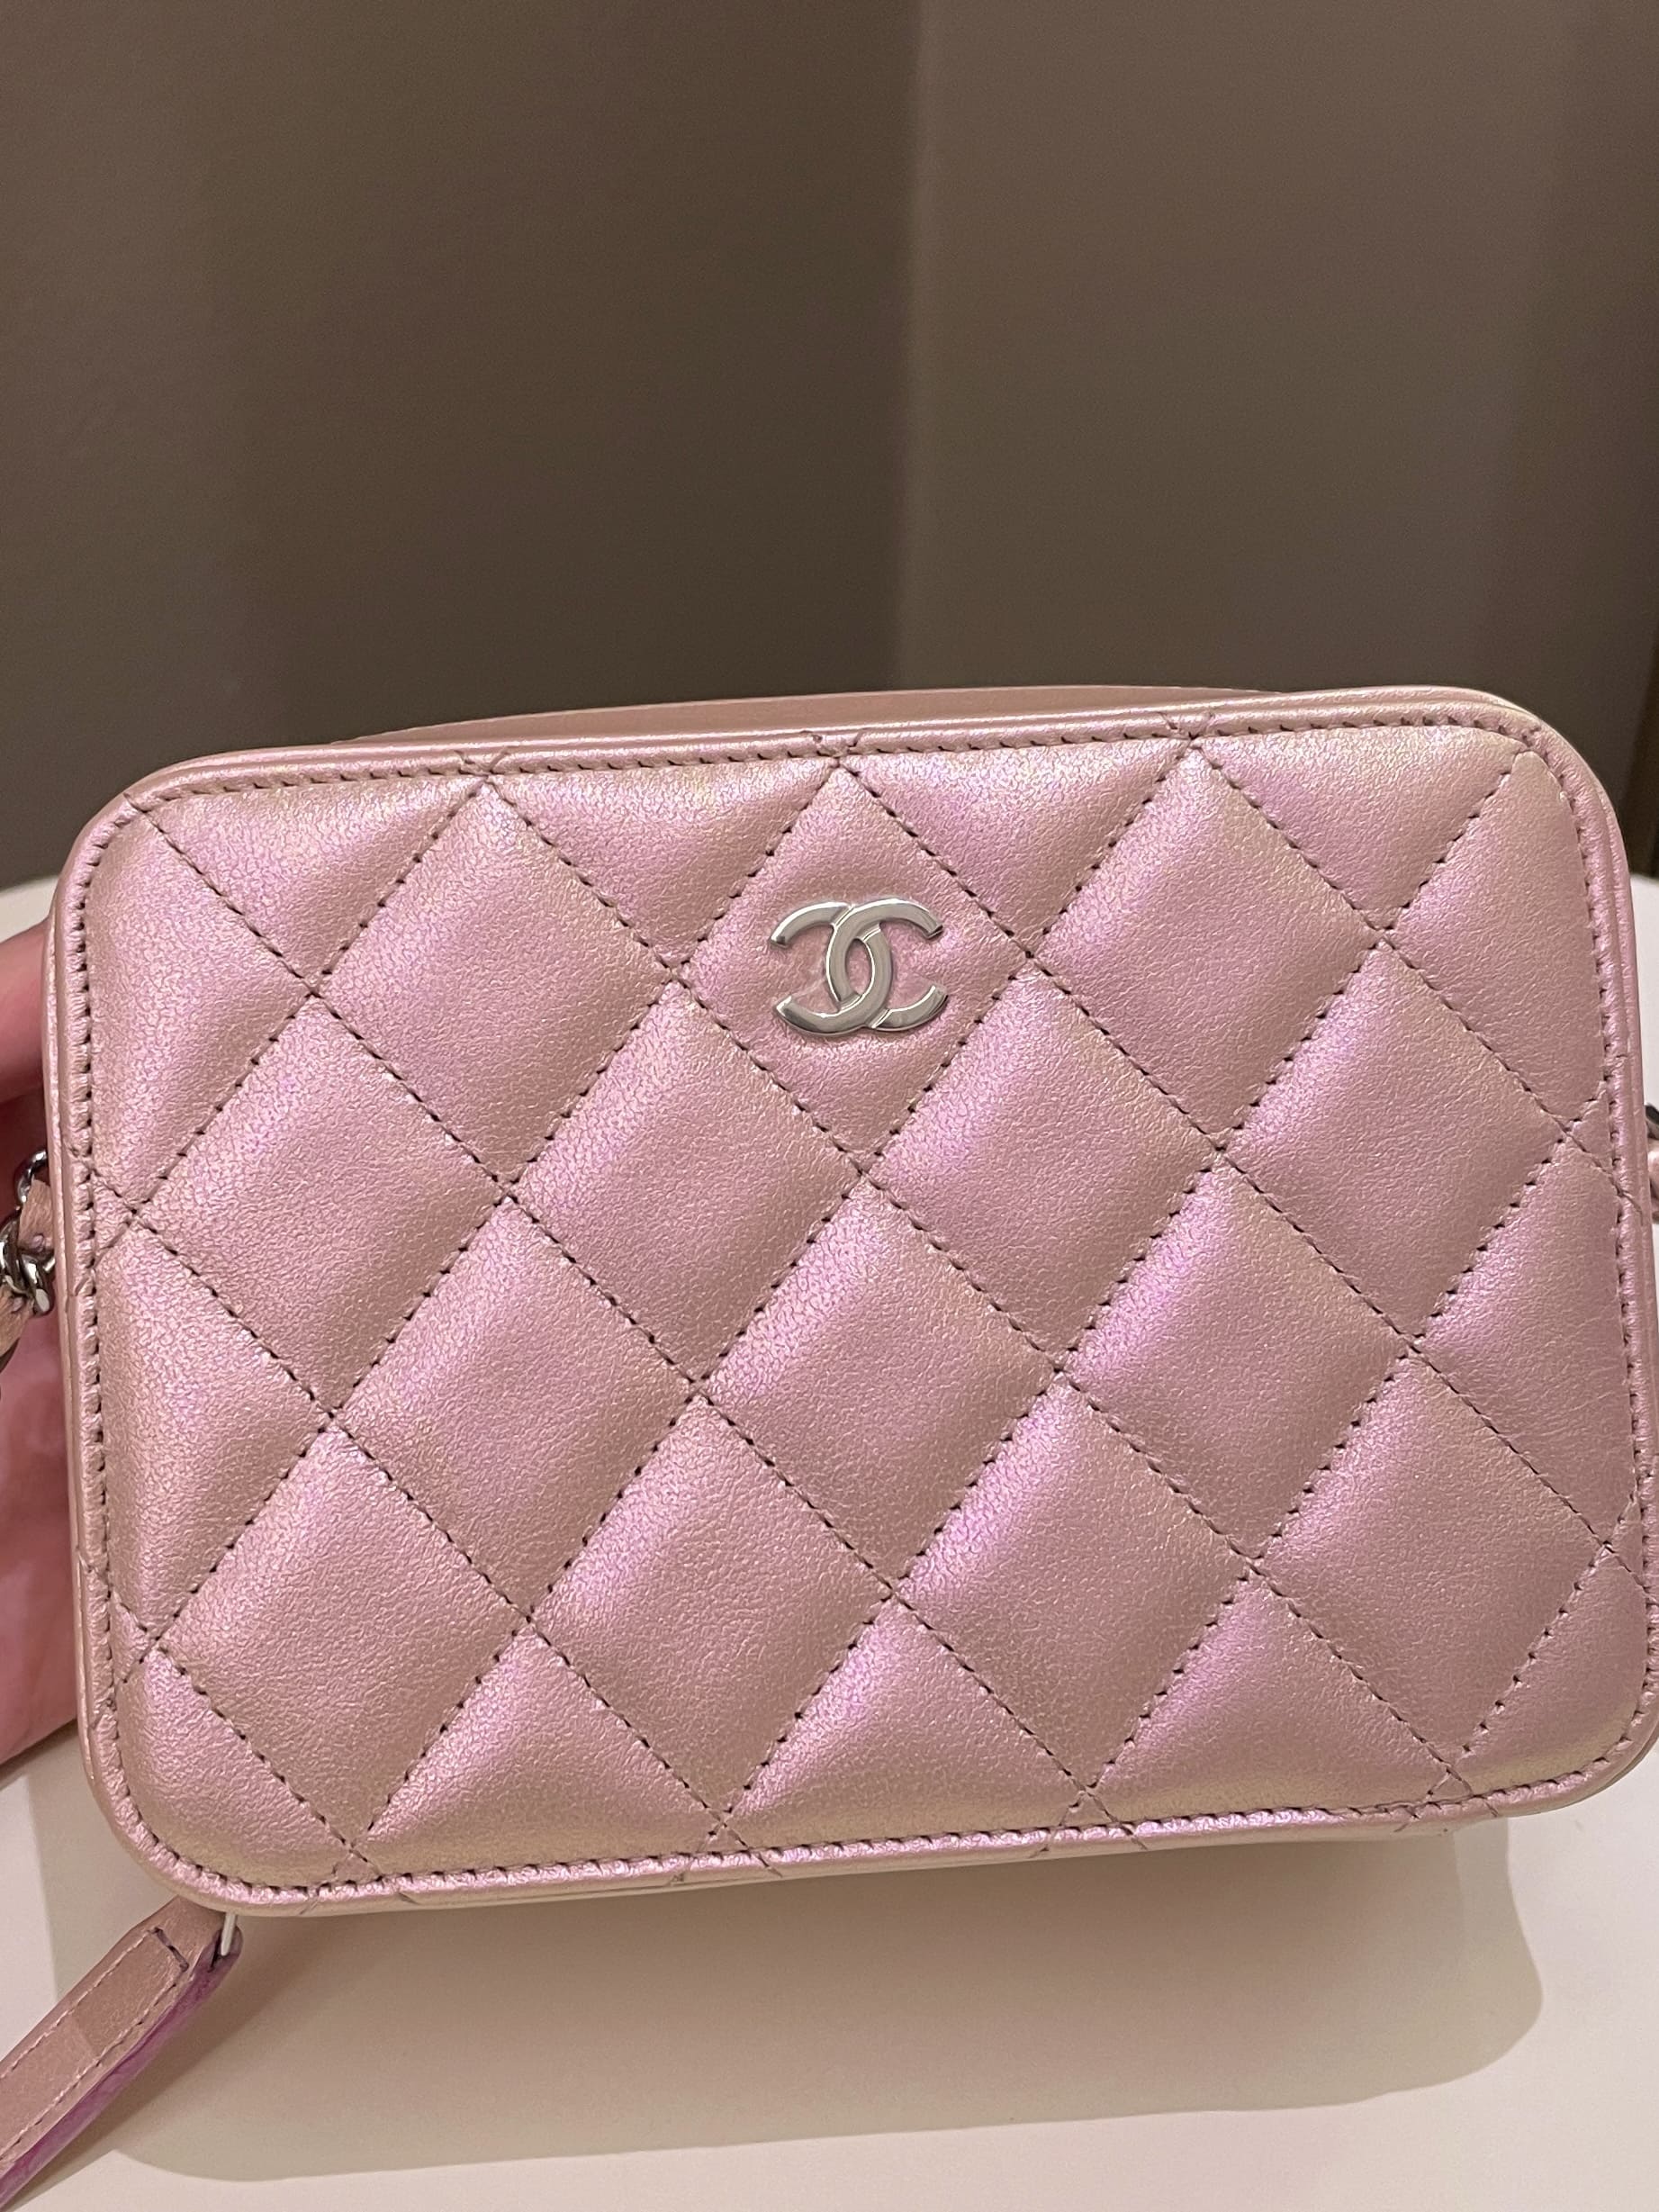 ON HOLD Chanel 21k my perfect mini iridescent pink mini square